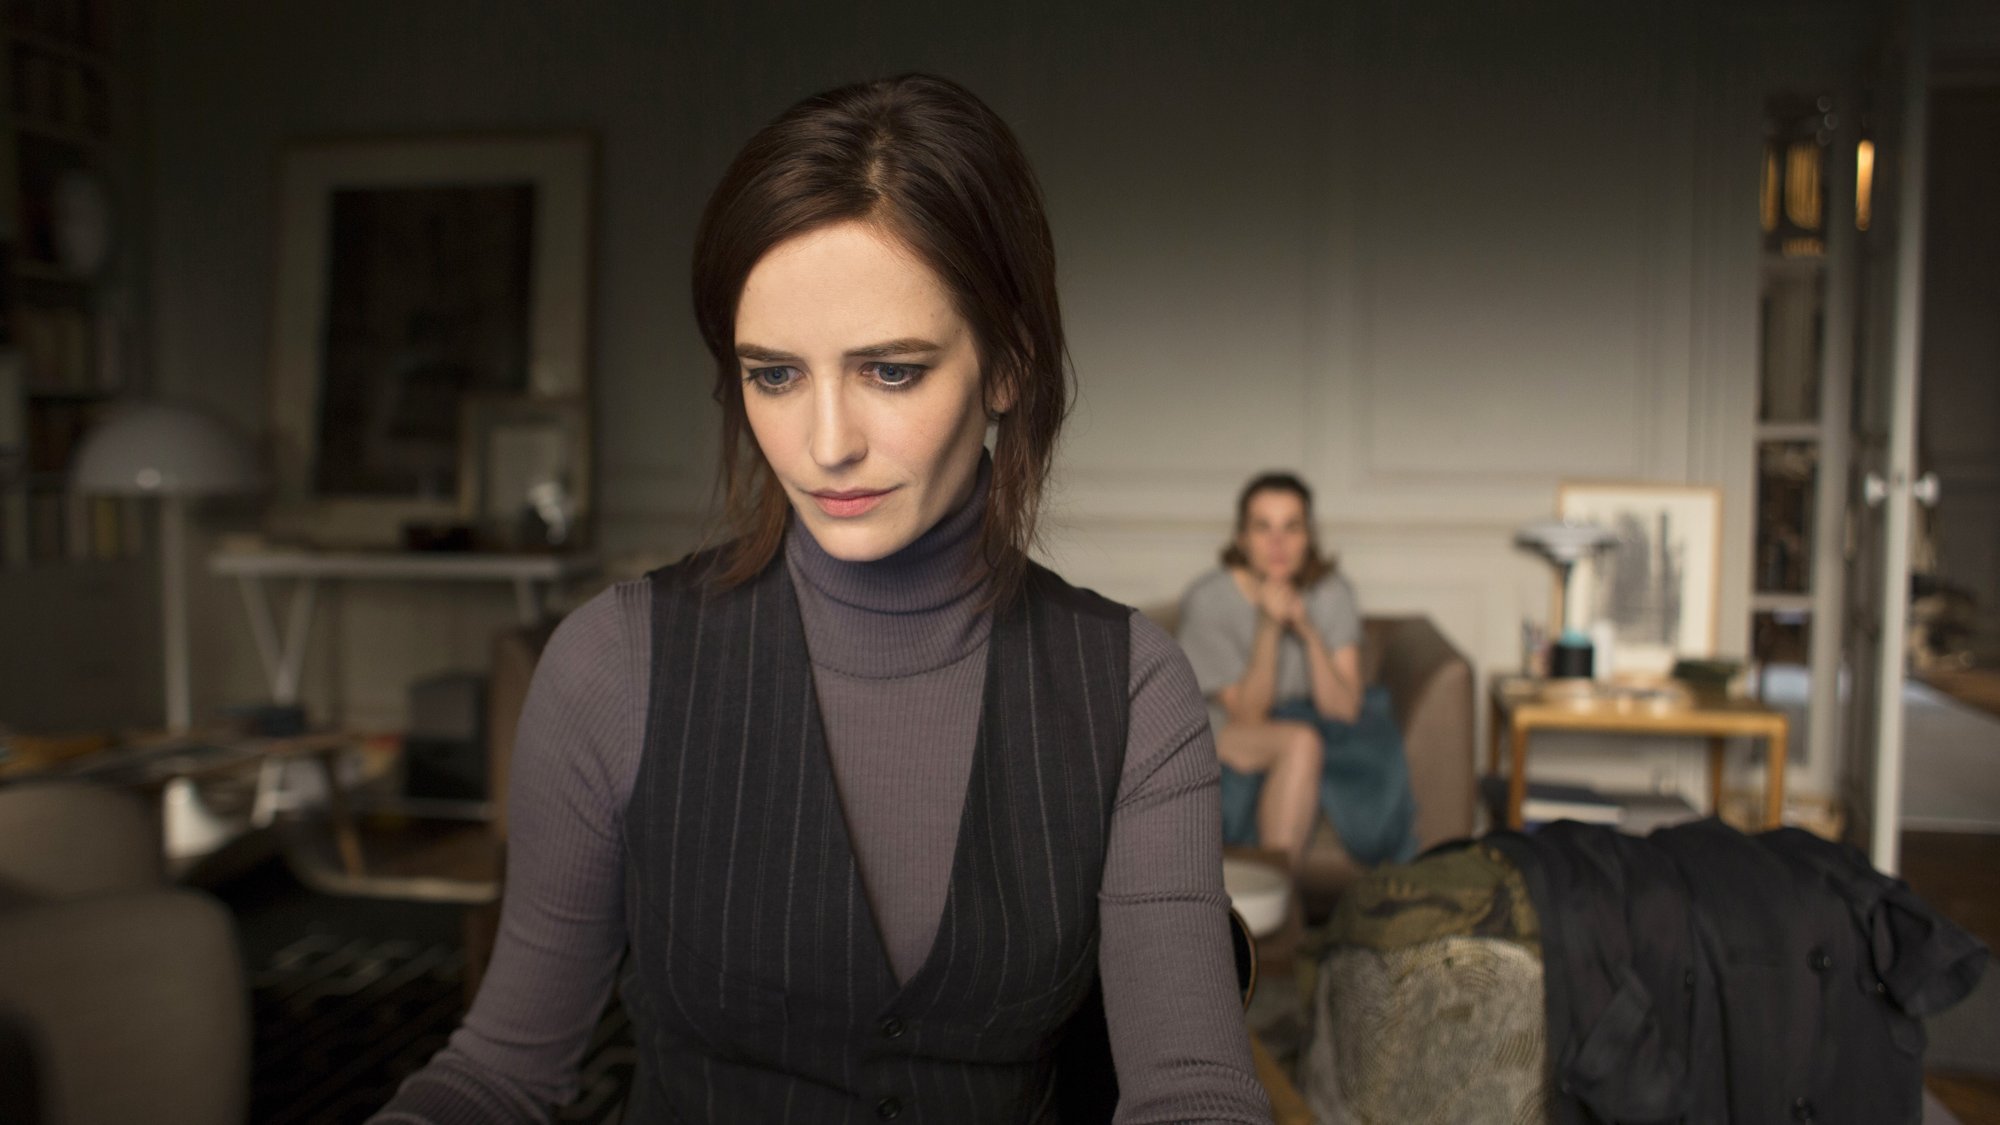 Eva Green stars as L. and Emmanuelle Seigner stars as Delphine de Vigan in Sony Pictures Classics' Based on a True Story (2017)